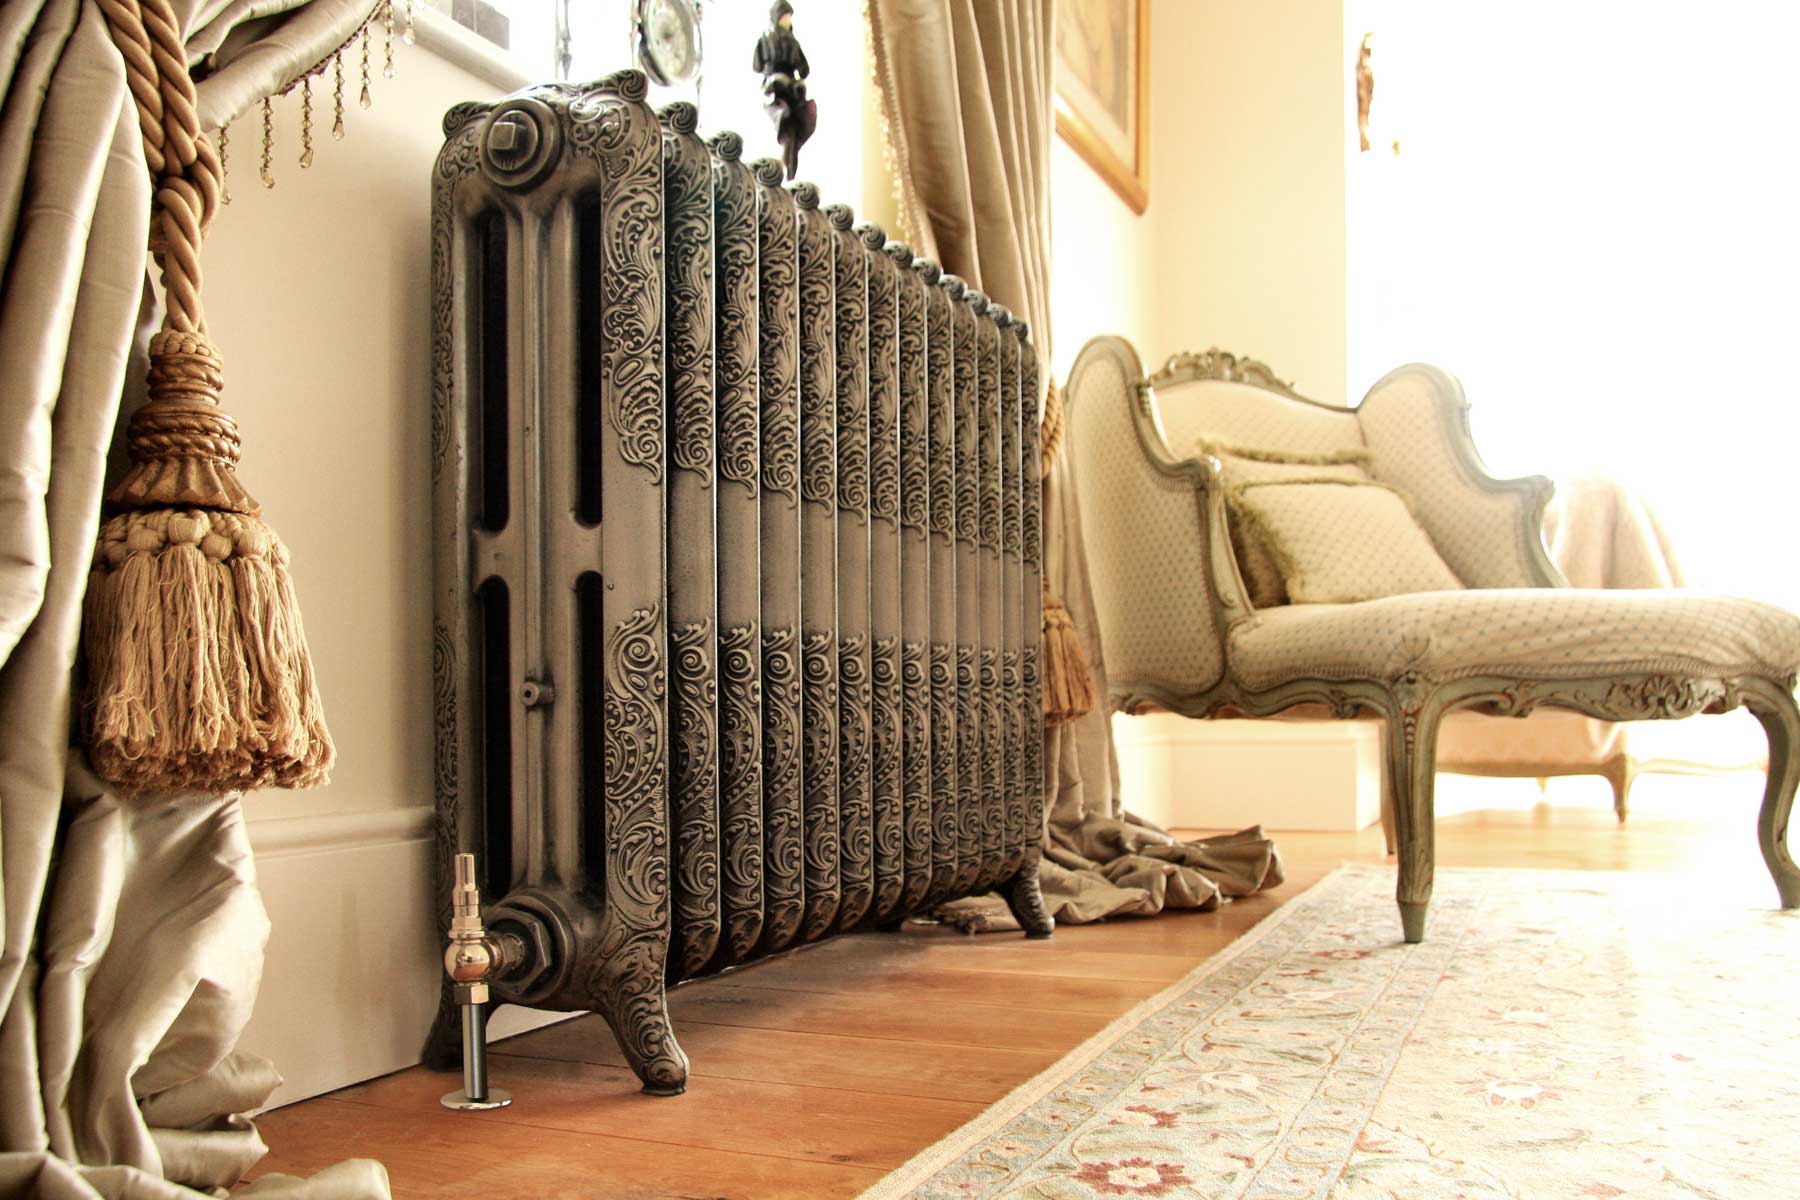 Antique radiators have an elegance. From the Old Radiator Company